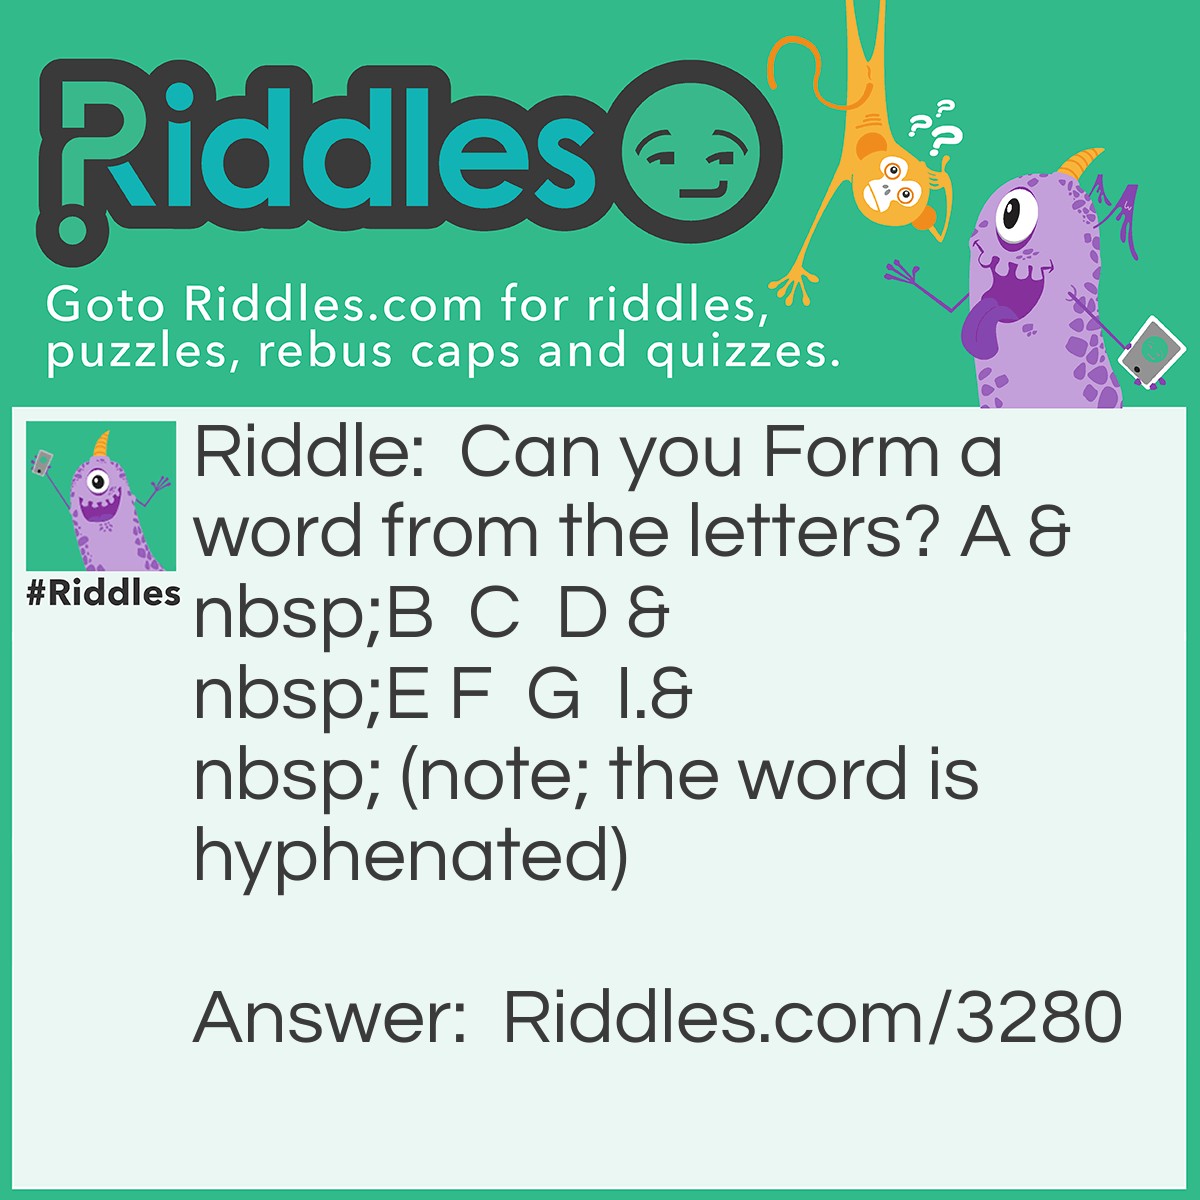 Riddle: Can you Form a word from the letters? A  B  C  D  E F  G  I.  (note; the word is hyphenated) Answer: Big-Faced.